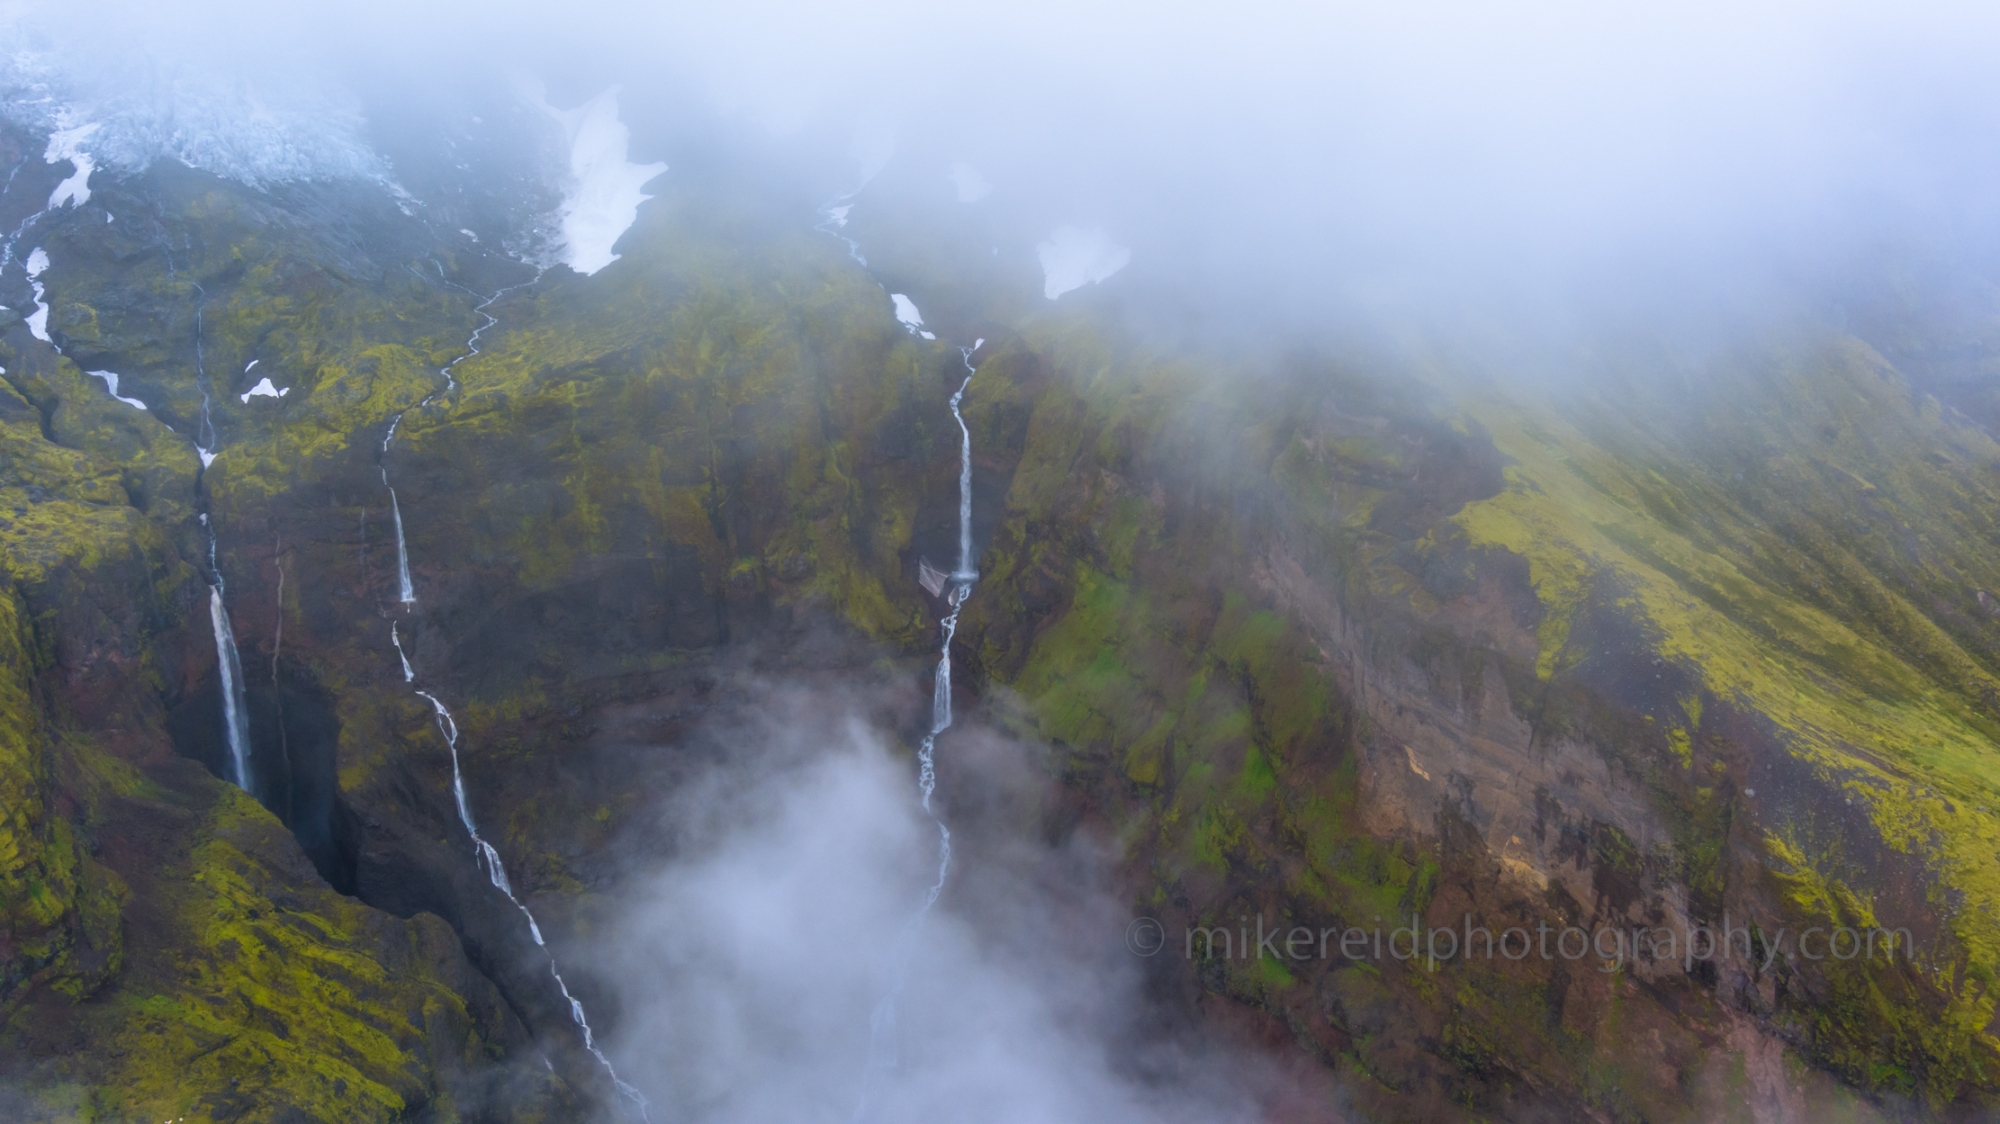 Over Iceland Mountain Falls in the Mist.jpg